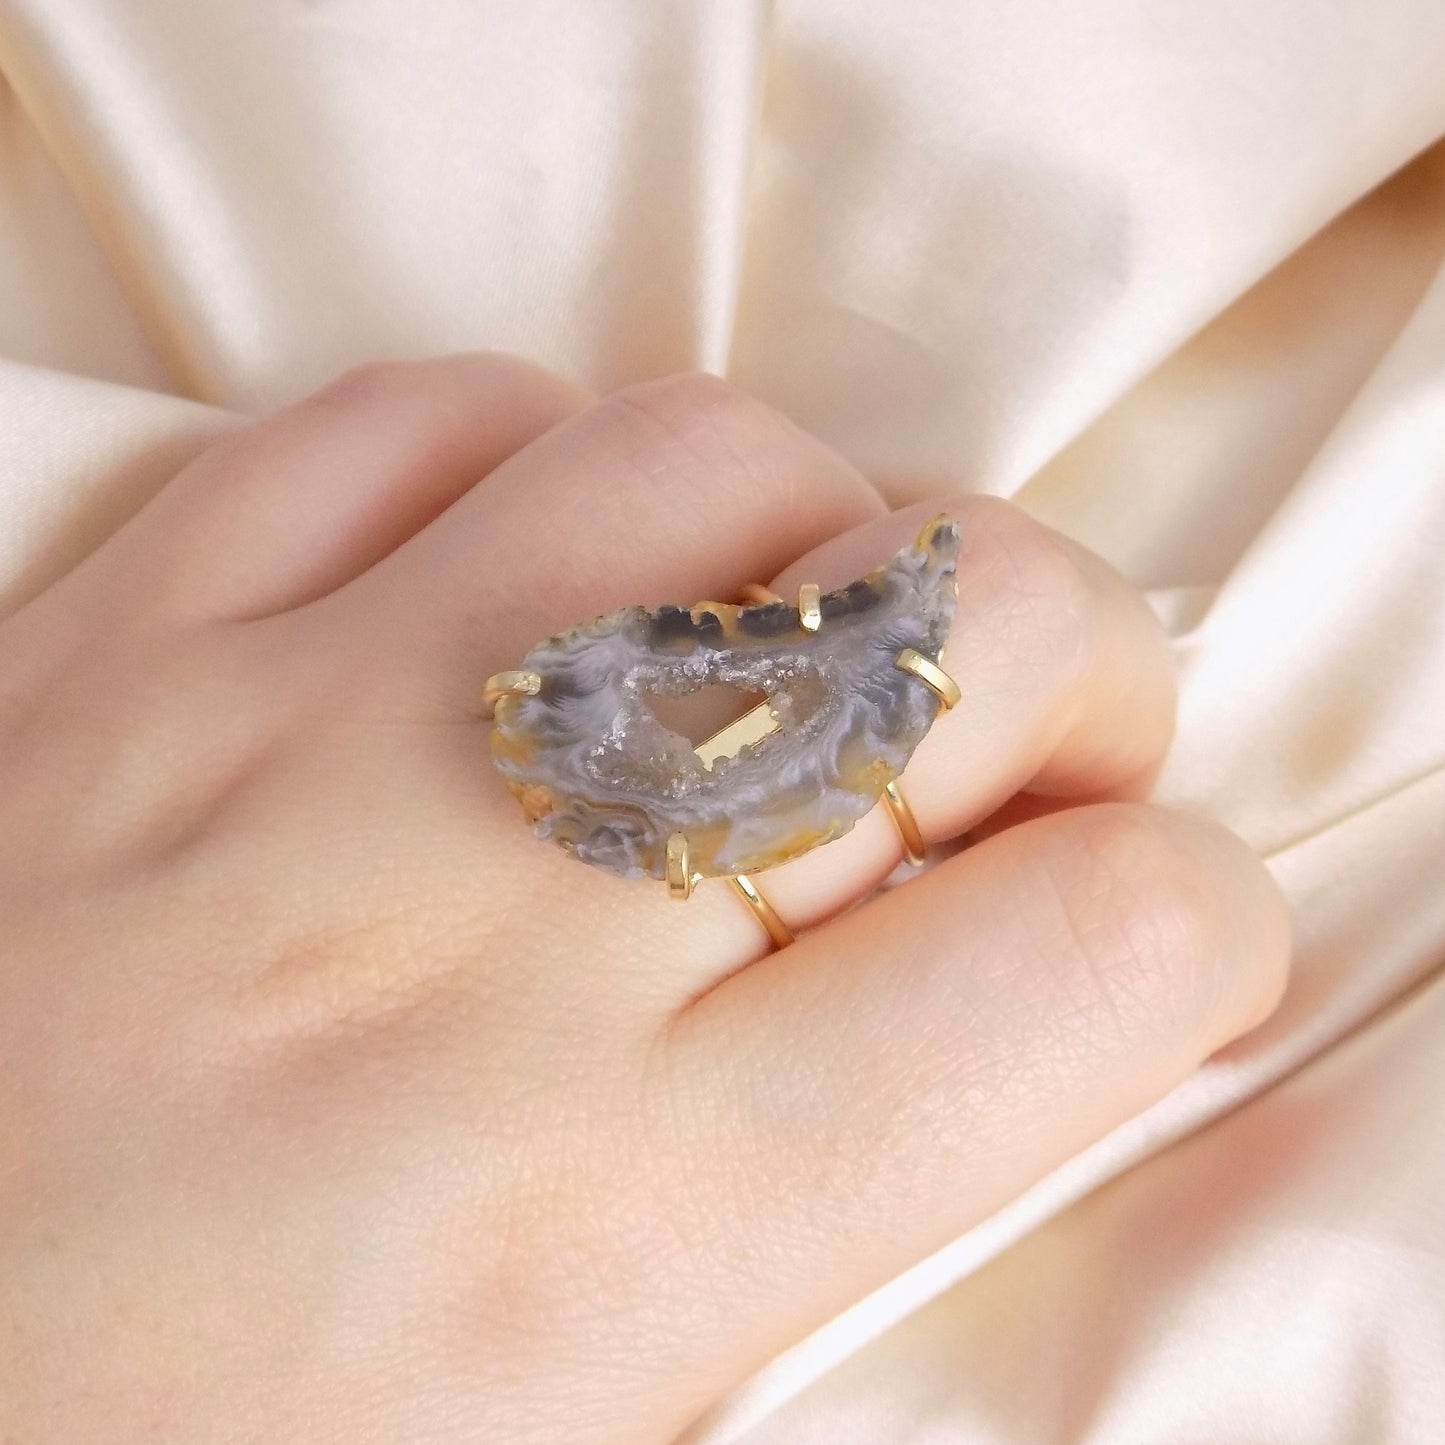 Geode Slice Ring Gold Plated Adjustable, Large Gray Crystal Cocktail Ring For Women, G15-01